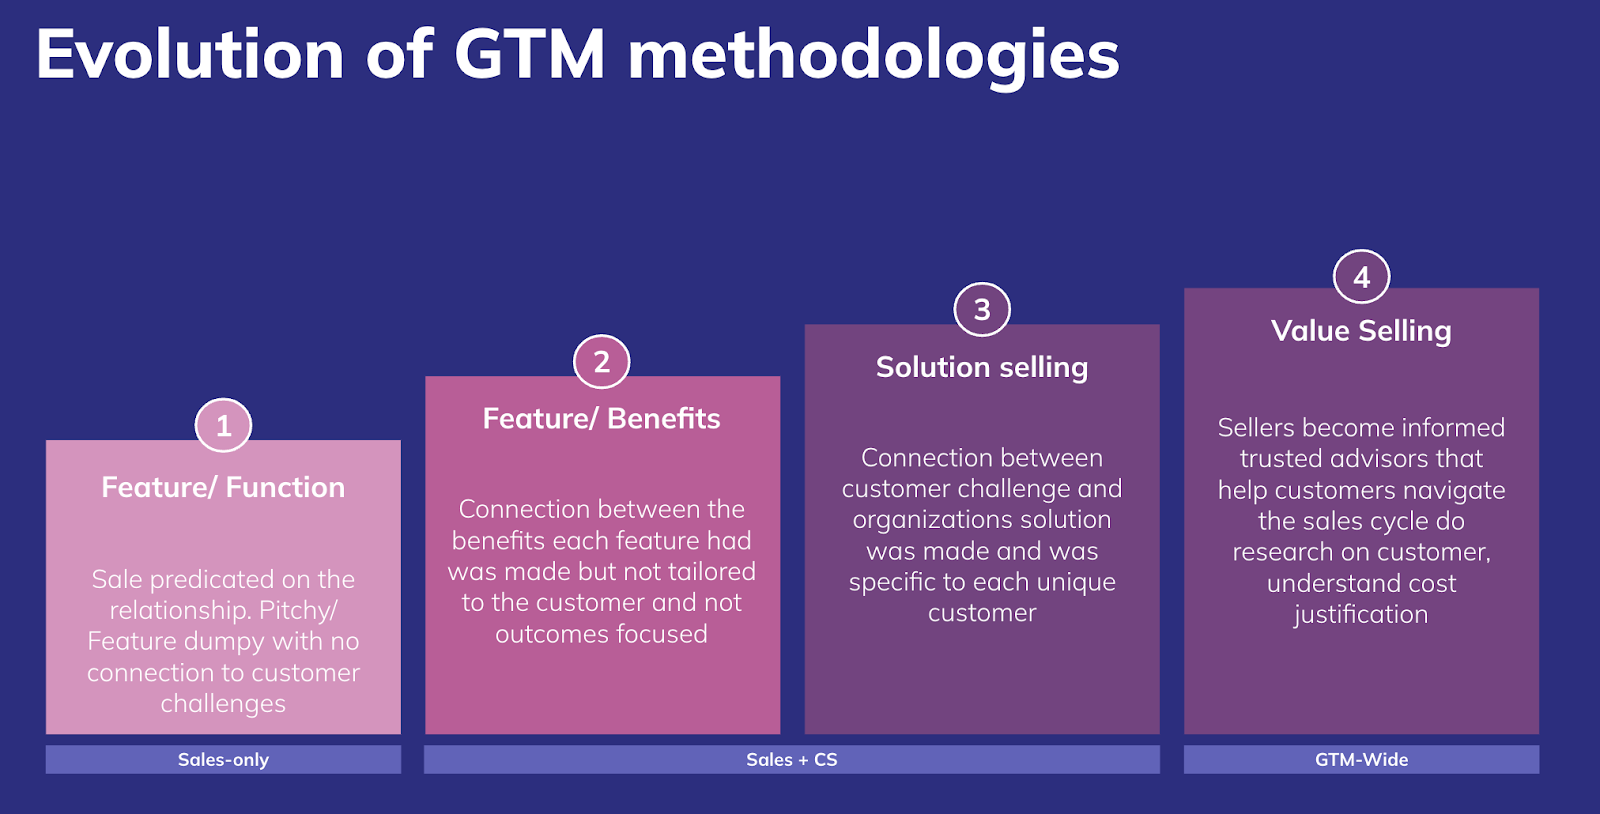 A complete guide to GTM methodologies